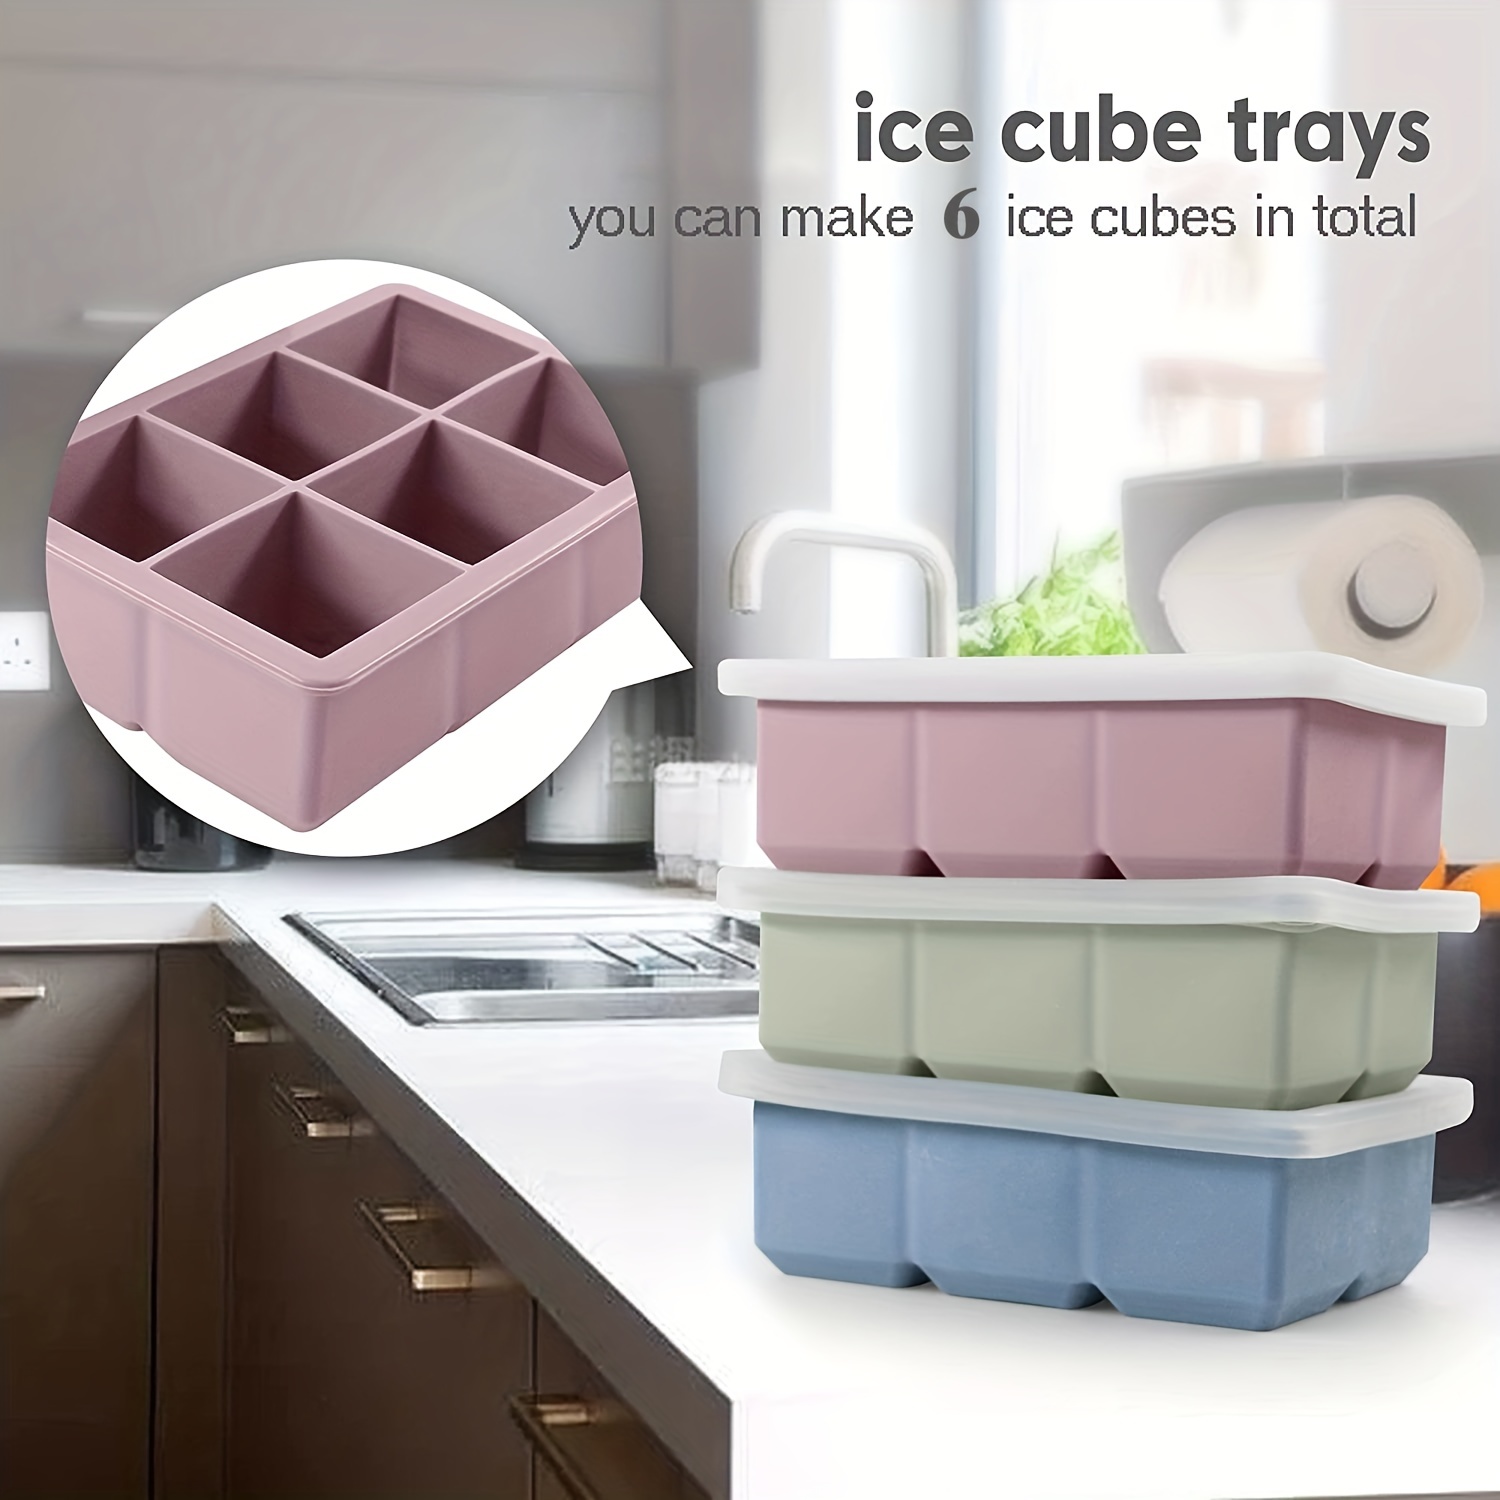 Cocktail Ice Tray - Ice Mold - Makes 6 Ice Cubes 